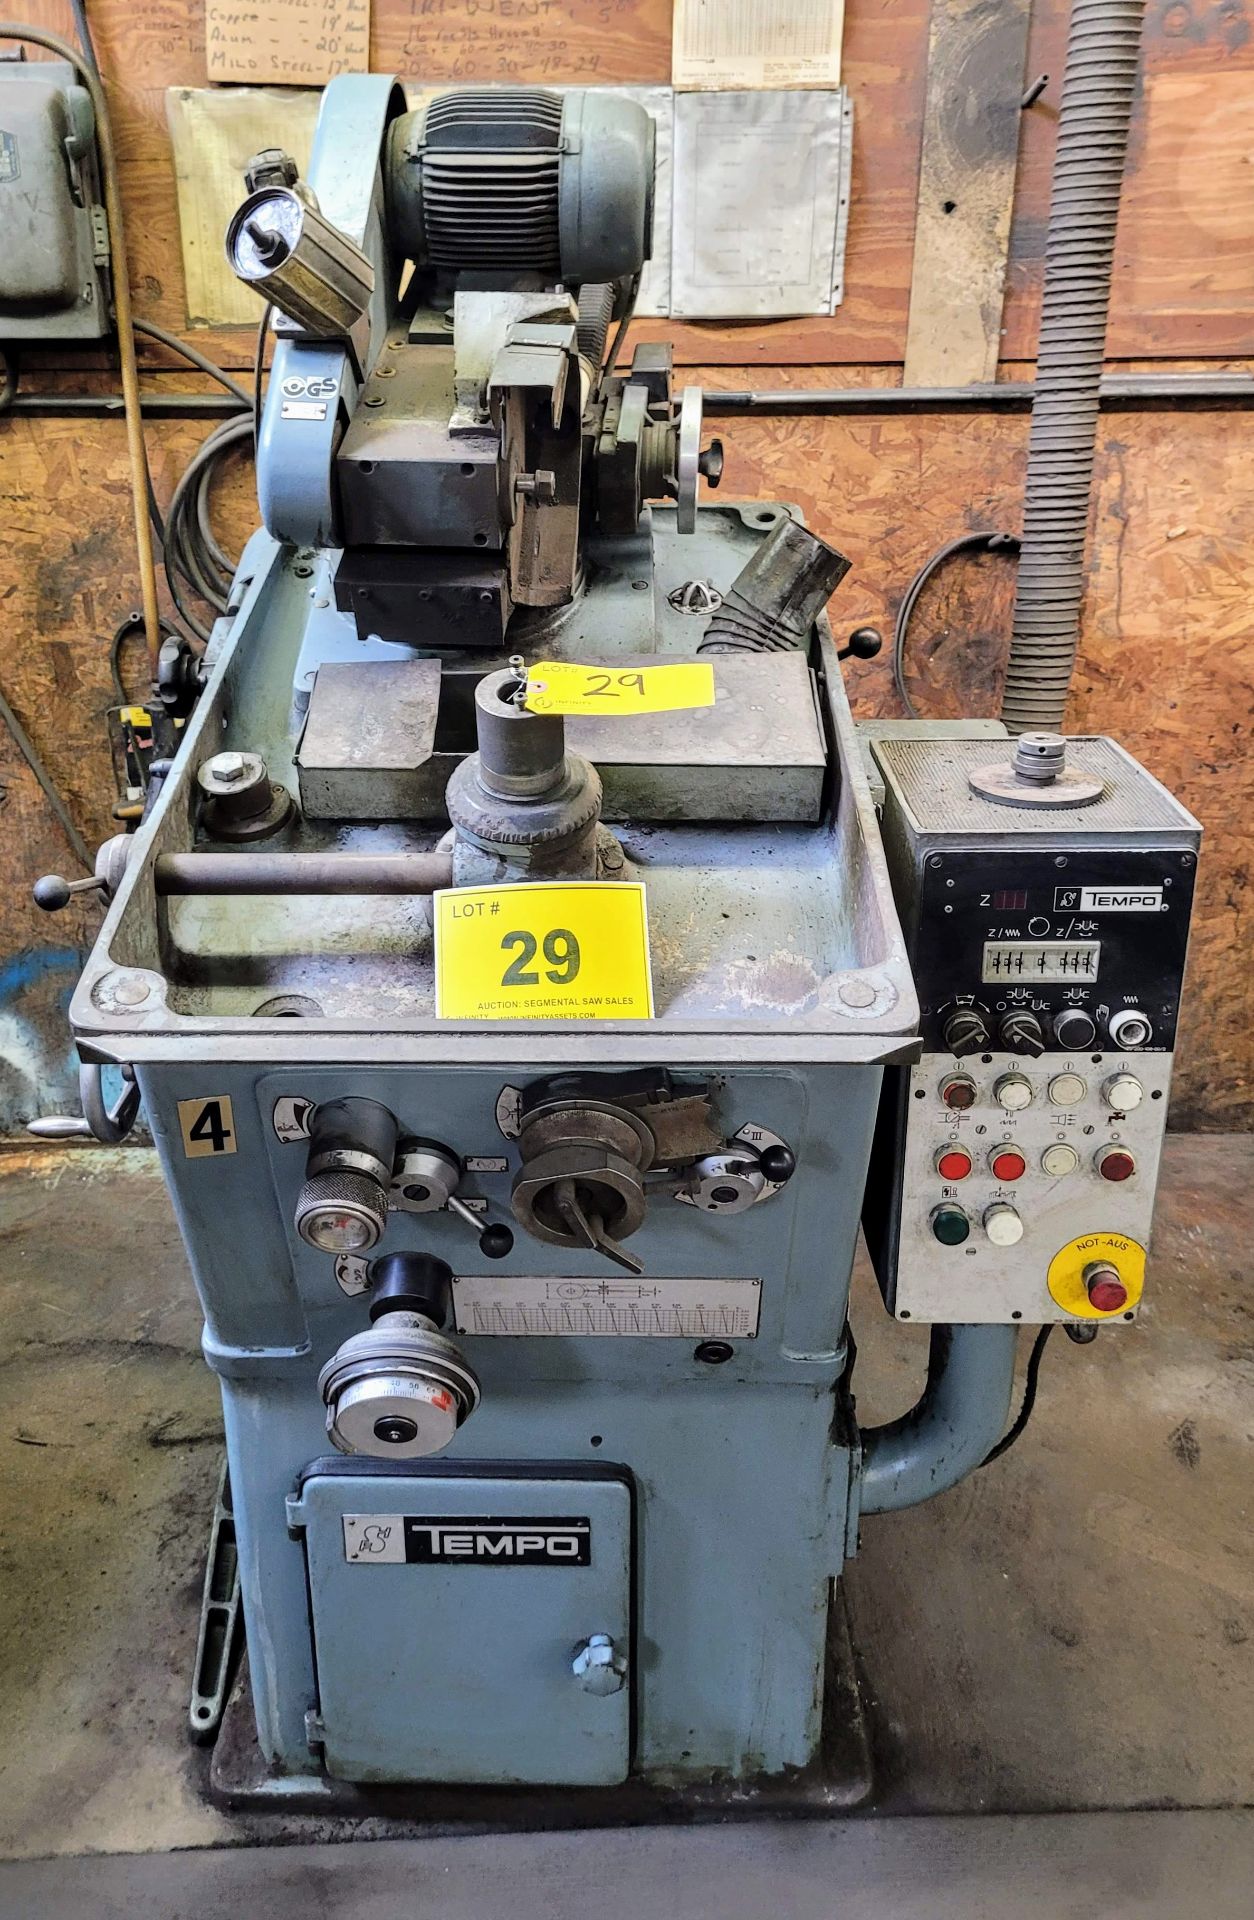 SCHMIDT TEMPO FGHS 40, AUTOMATIC VARIABLE SPEED SOLID OR SEGMENTAL BLADE SHARPENER, 20 TO 400 MM